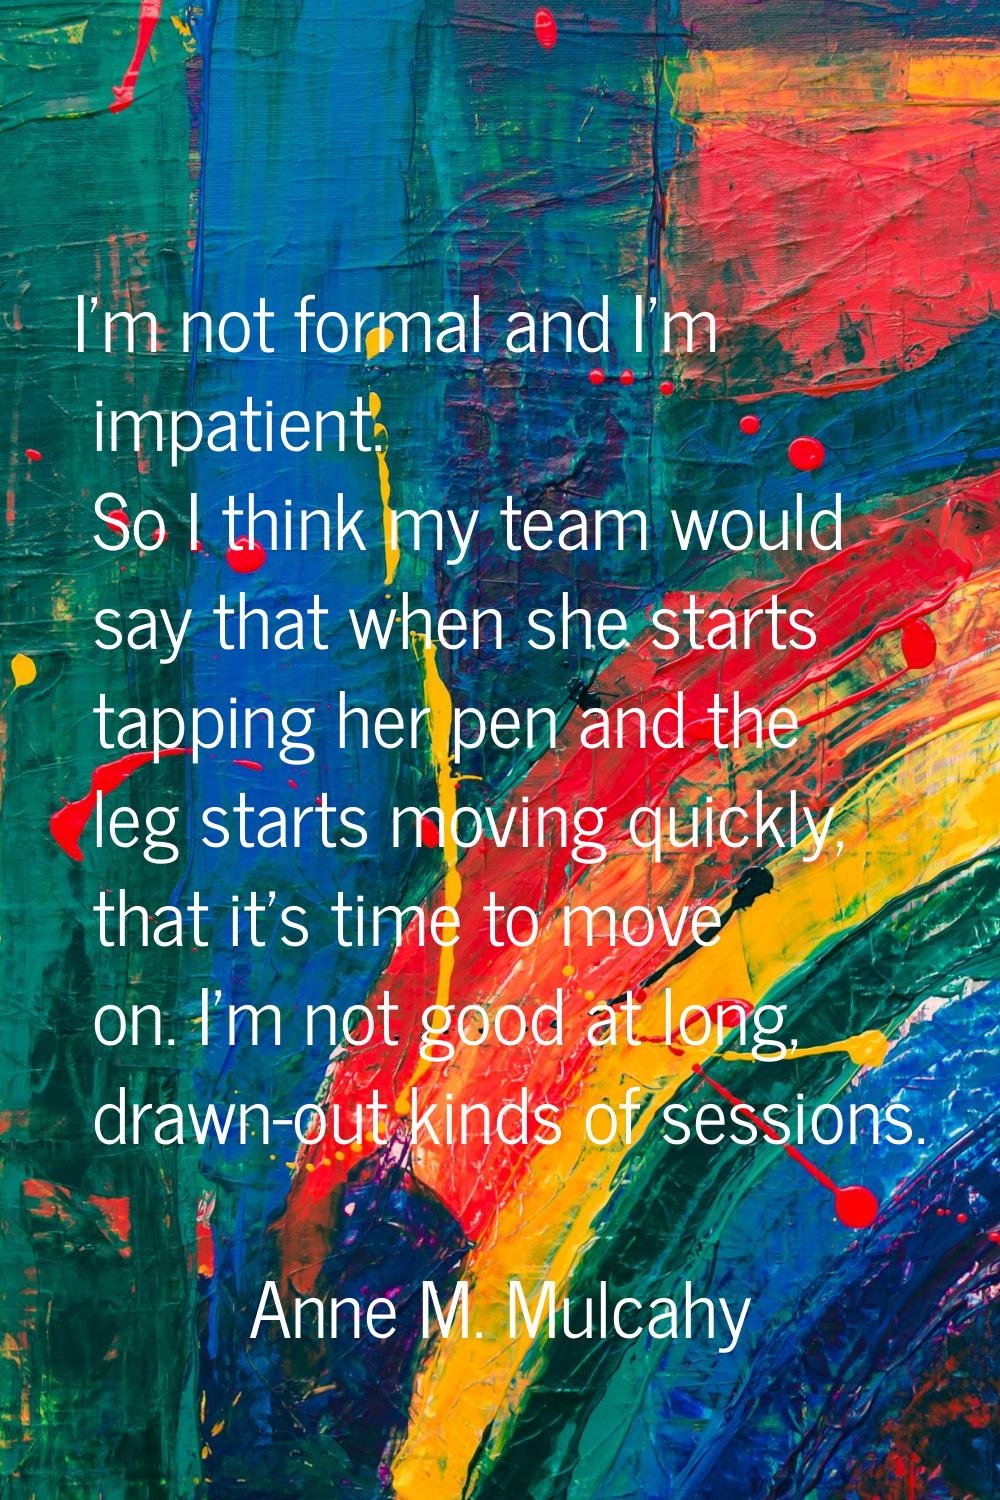 I'm not formal and I'm impatient. So I think my team would say that when she starts tapping her pen